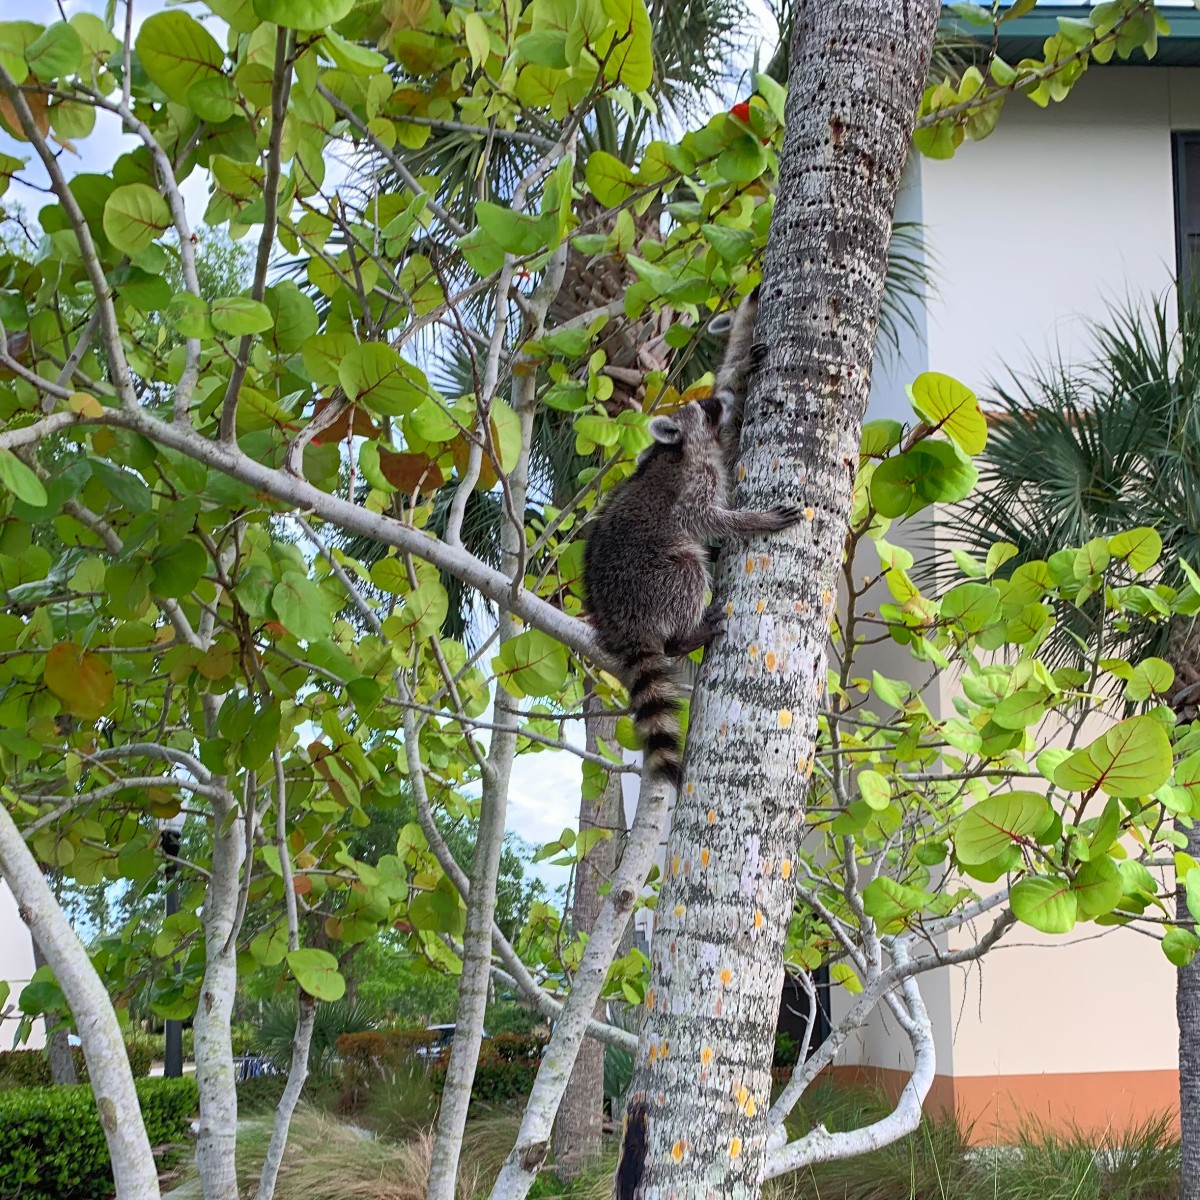 Critters crawling all over campus! These raccoons seem to have enjoyed their time in North Lake. 🌴☀️ Thanks to student Sam M. for sending these our way. #FGCU #campuslife